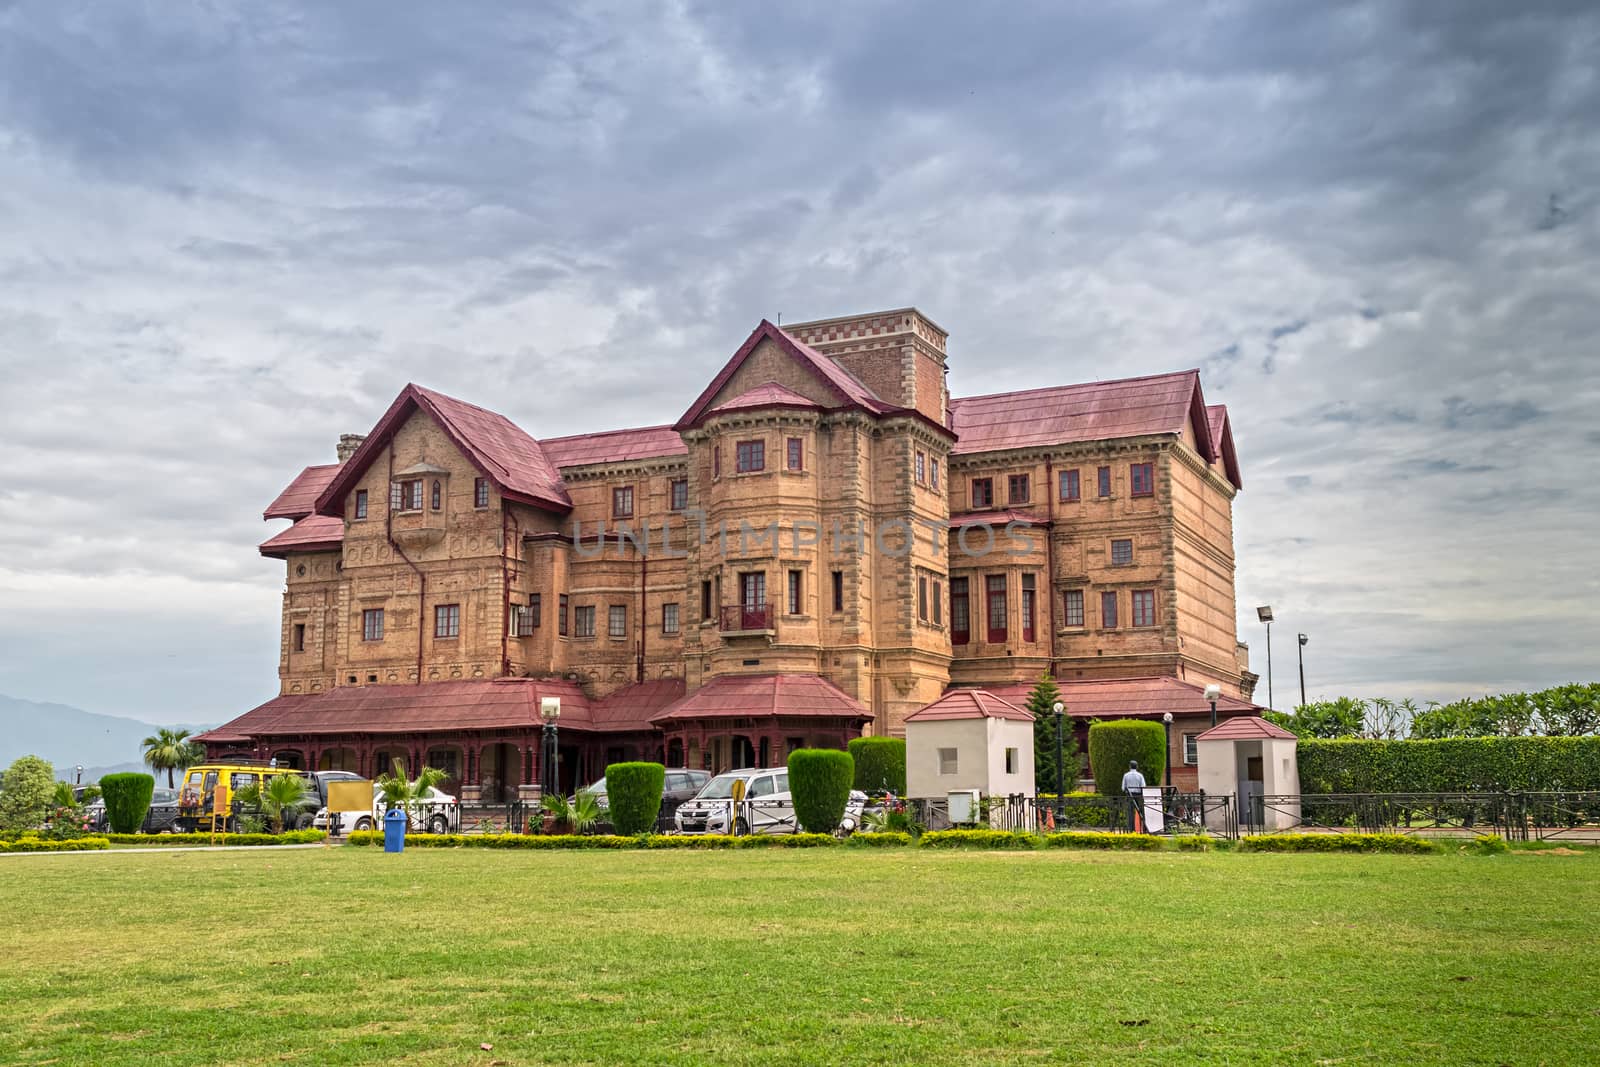 Amar Mahal Palace is a palace in Jammu that was built in the nineteenth century for Raja Amar Singh, a Dogra king by lalam